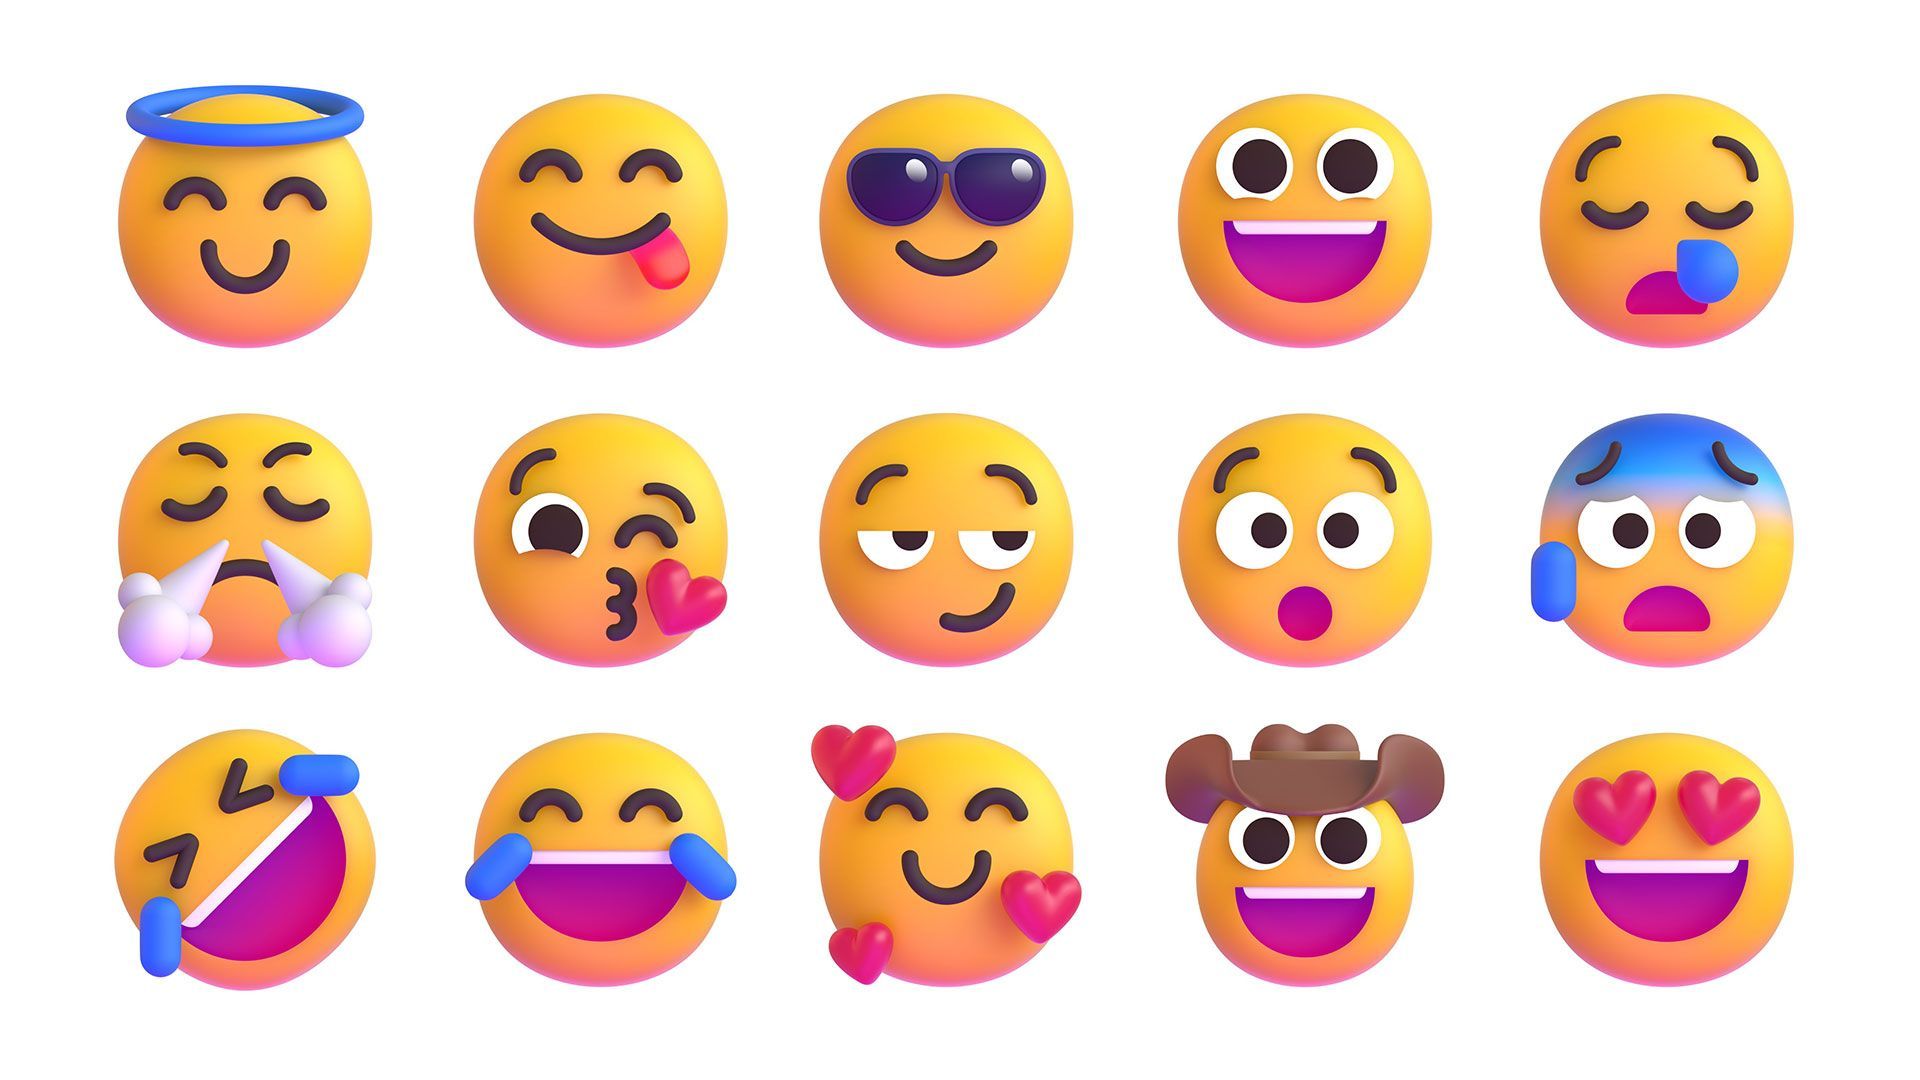 A set of 3D emojis with different expressions and accessories. - Emoji